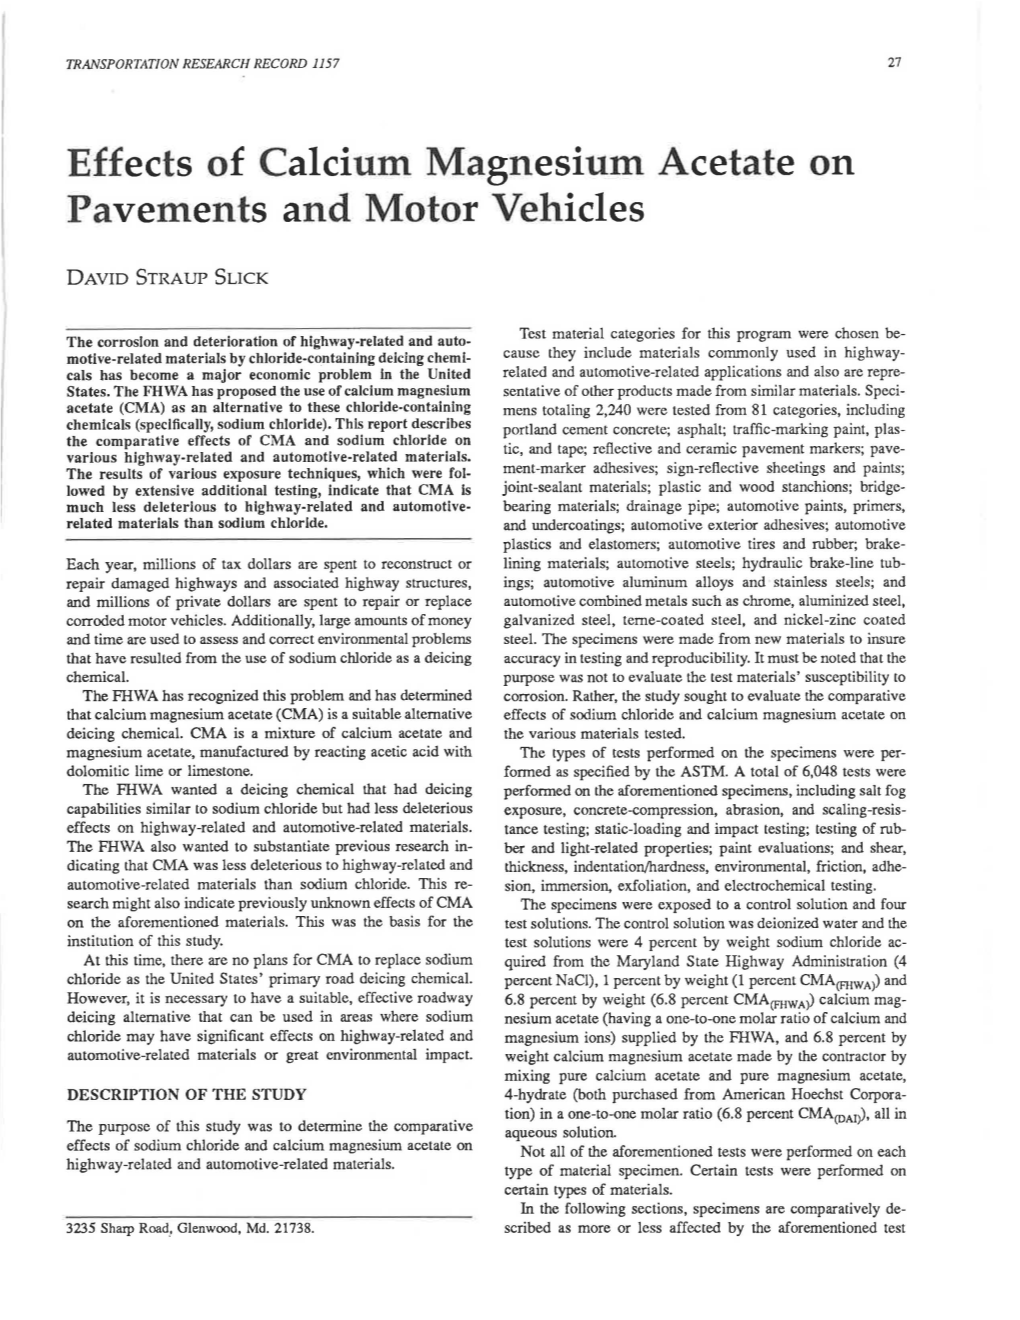 Effects of Calcium Magnesium Acetate on Pavements and Motor Vehicles